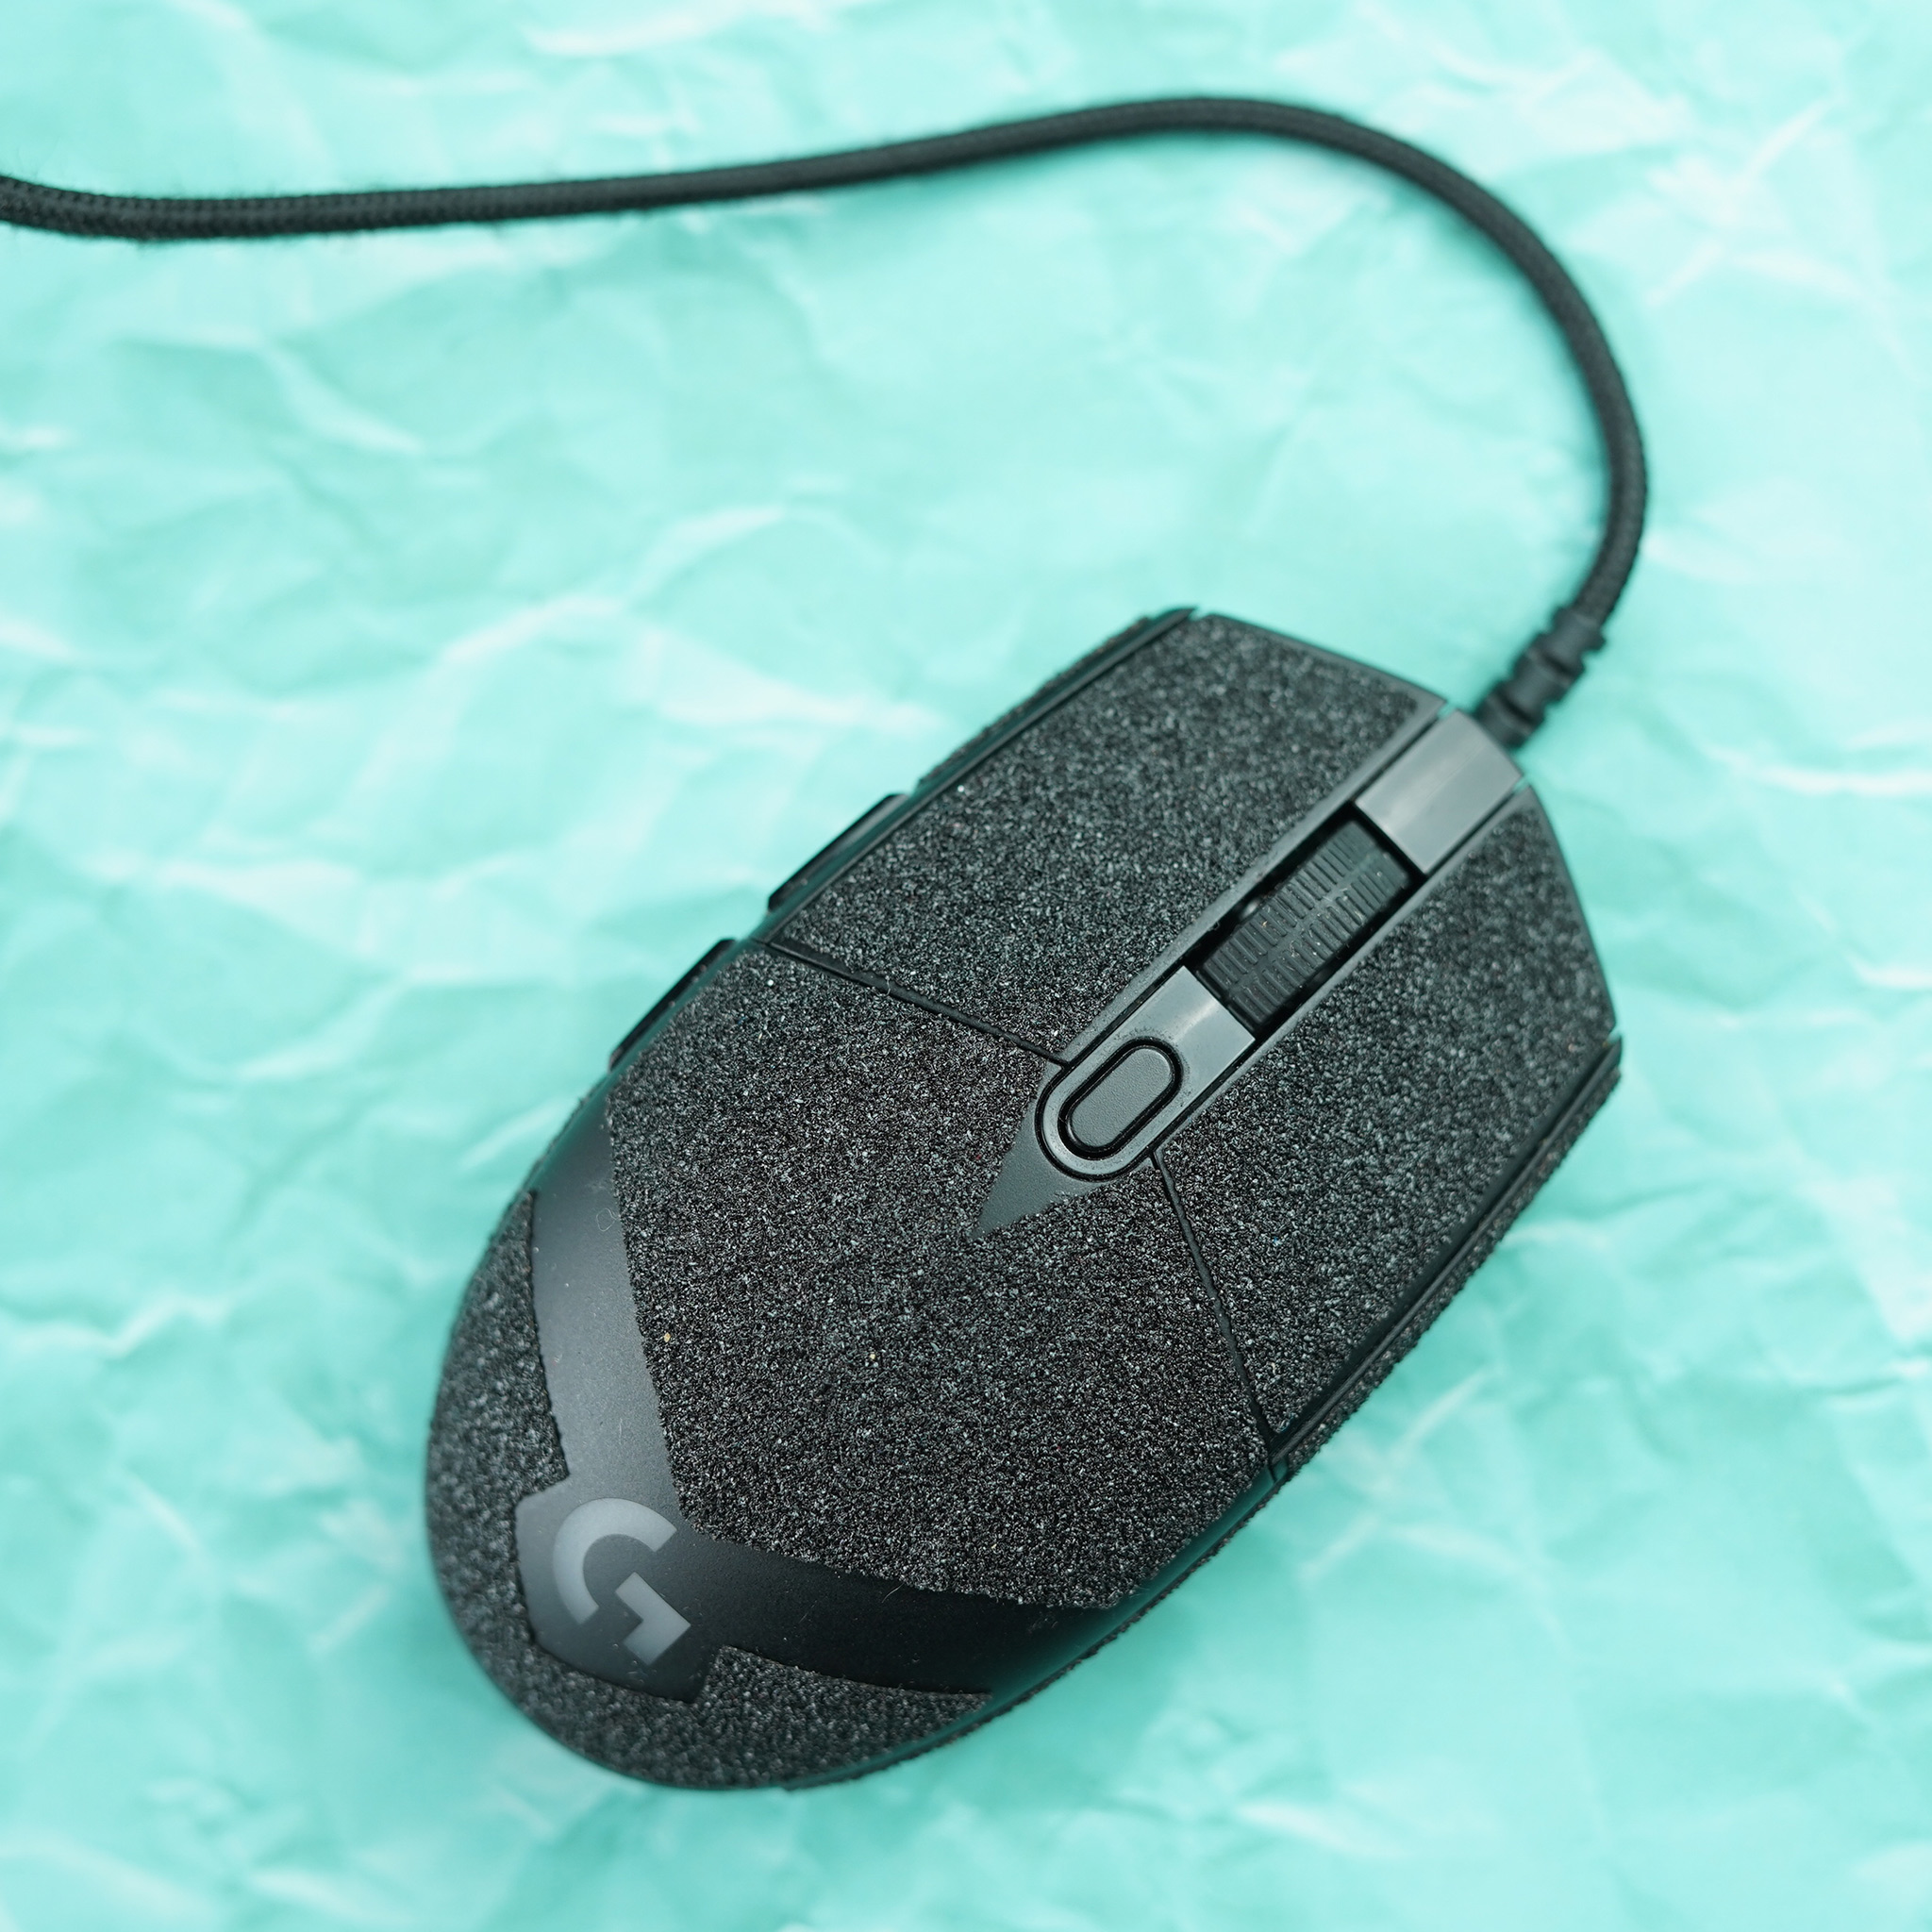 Logitech G302 Antgrip • Antgrip - Upgrade your gaming mouse.